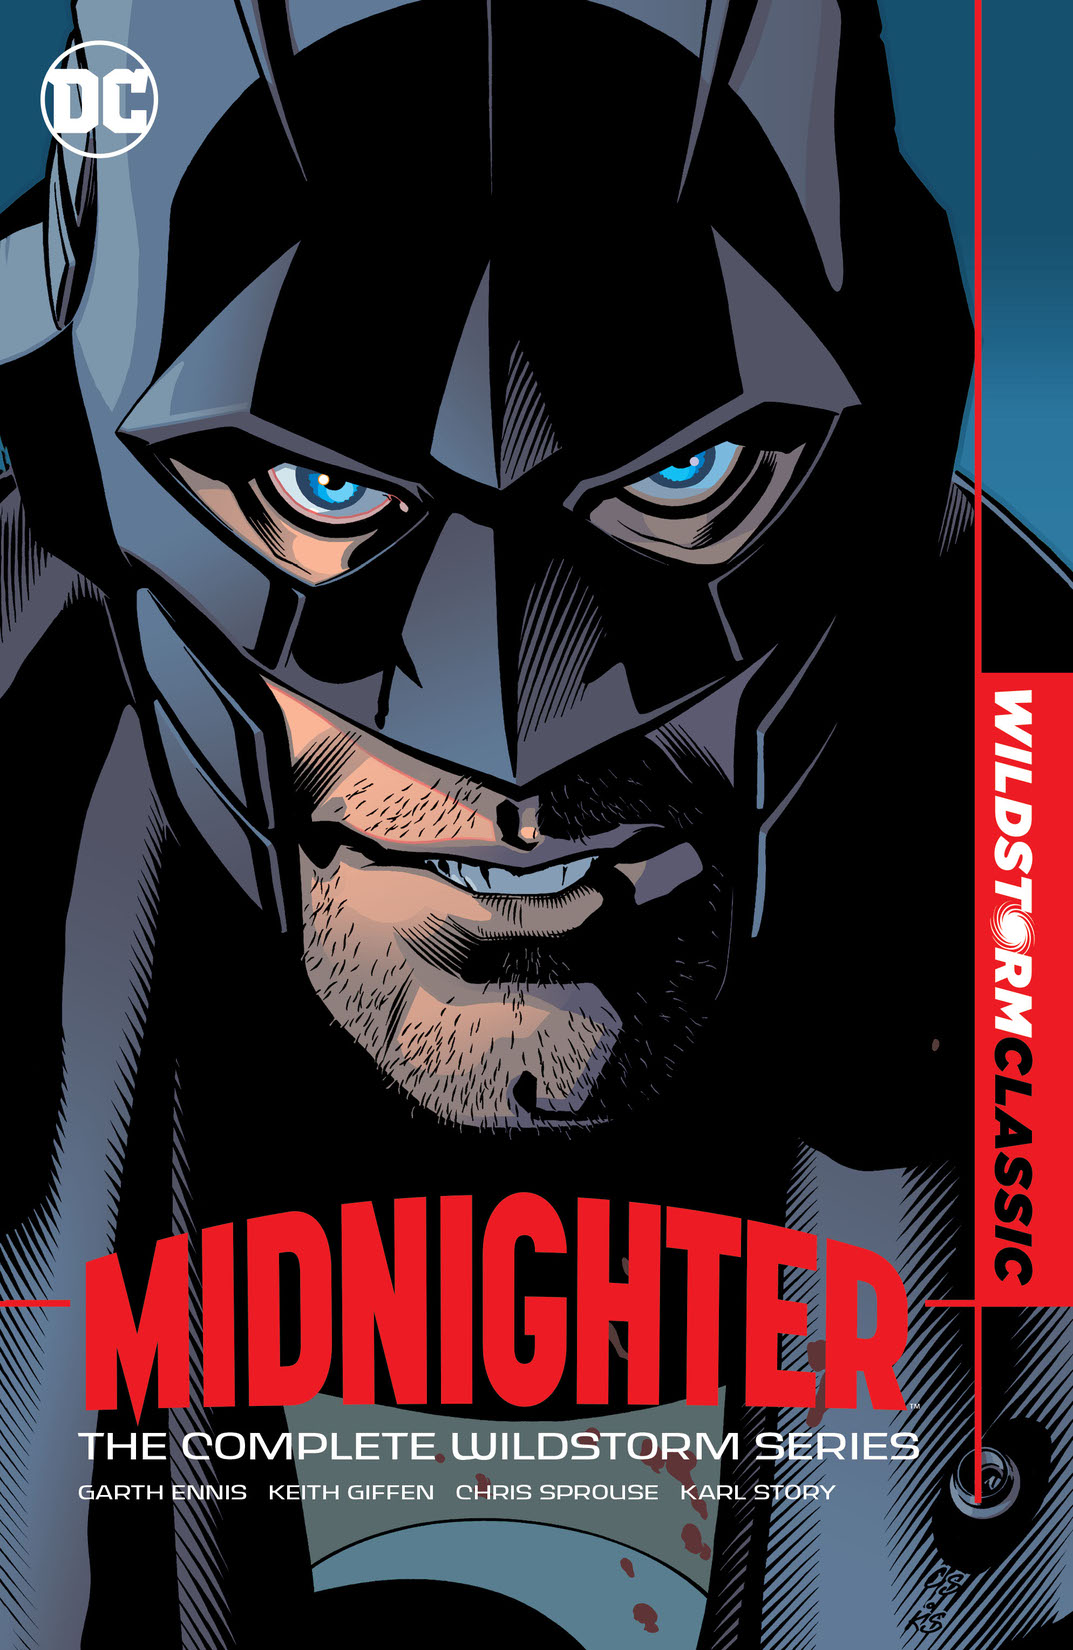 Midnighter: The Complete Wildstorm Series preview images